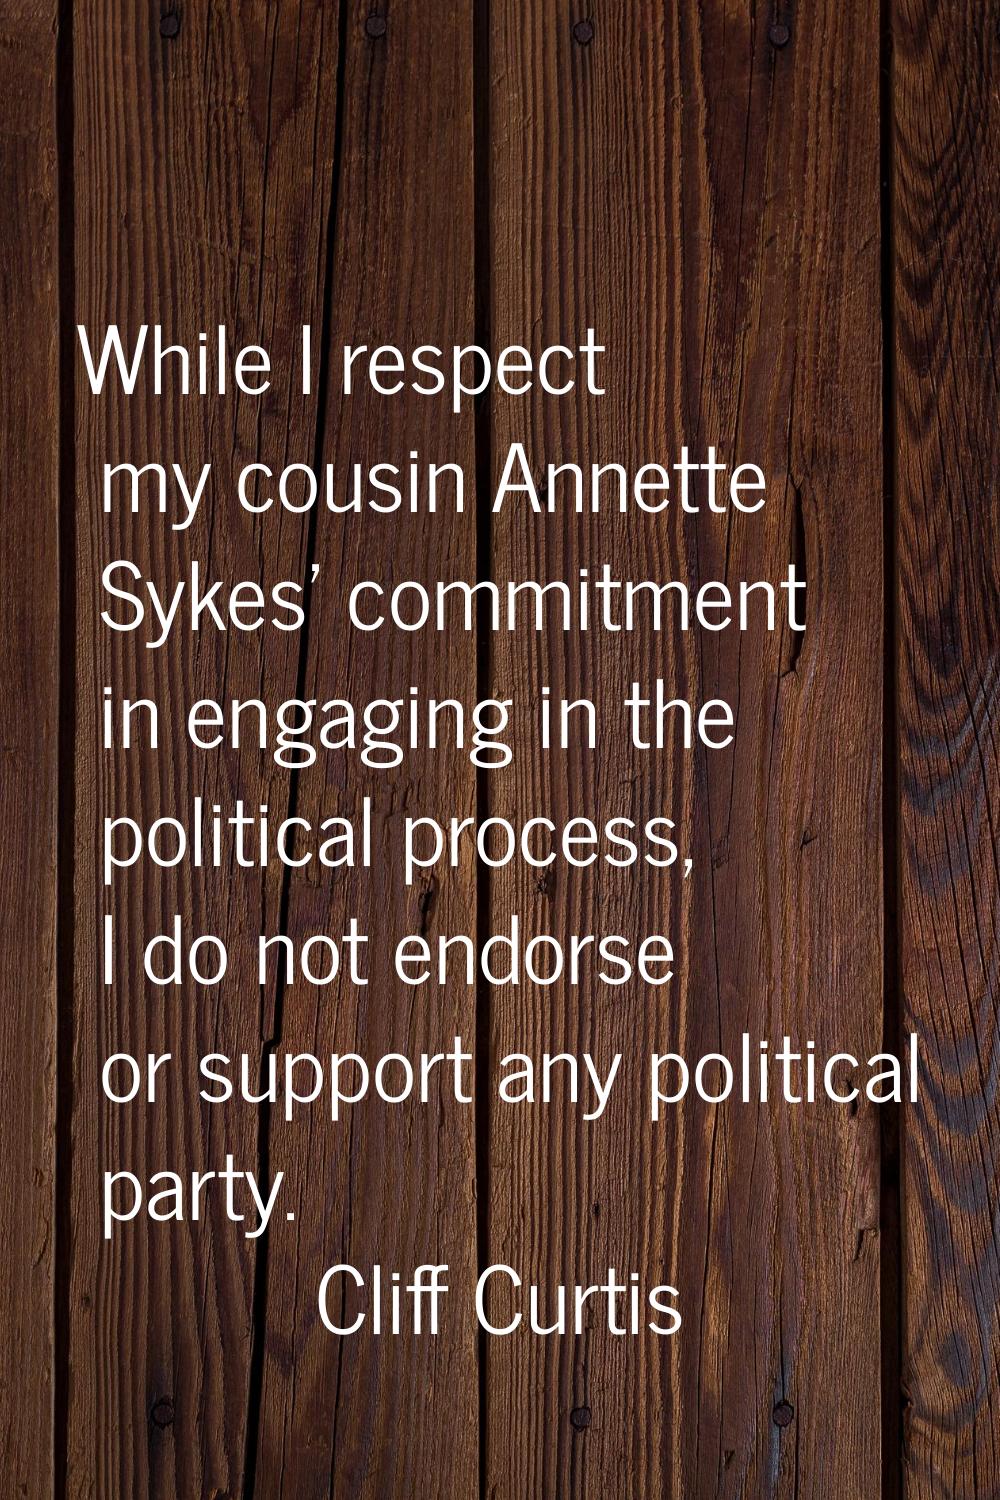 While I respect my cousin Annette Sykes' commitment in engaging in the political process, I do not 